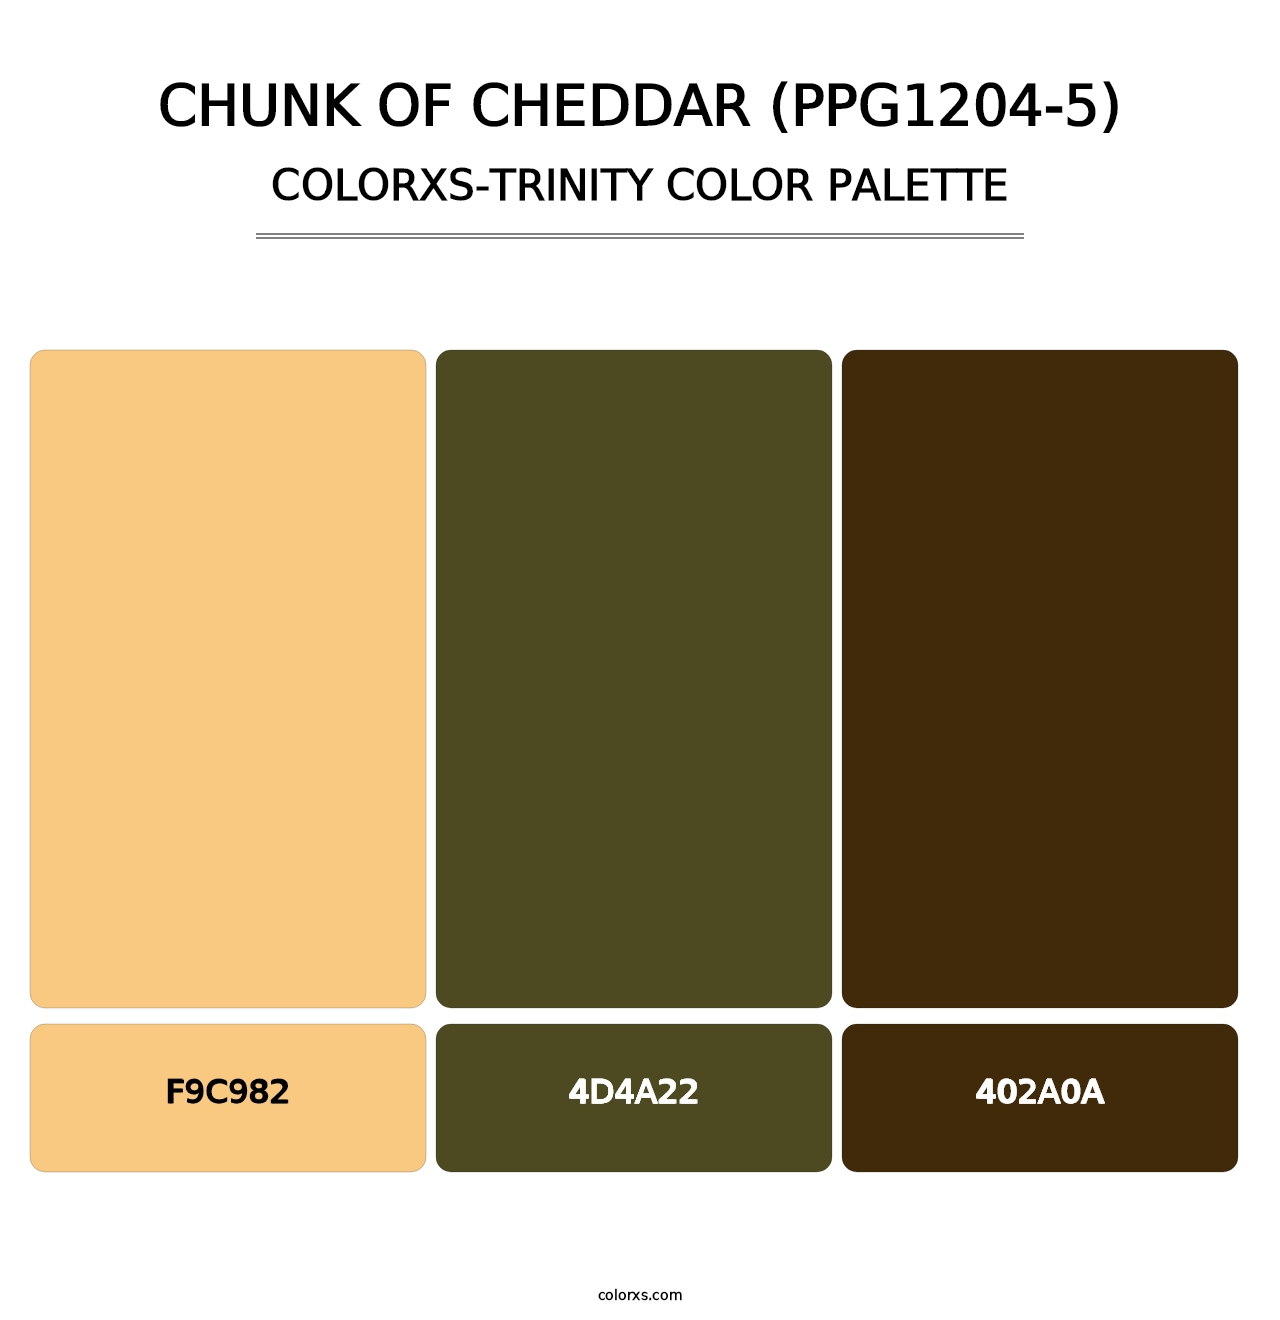 Chunk Of Cheddar (PPG1204-5) - Colorxs Trinity Palette